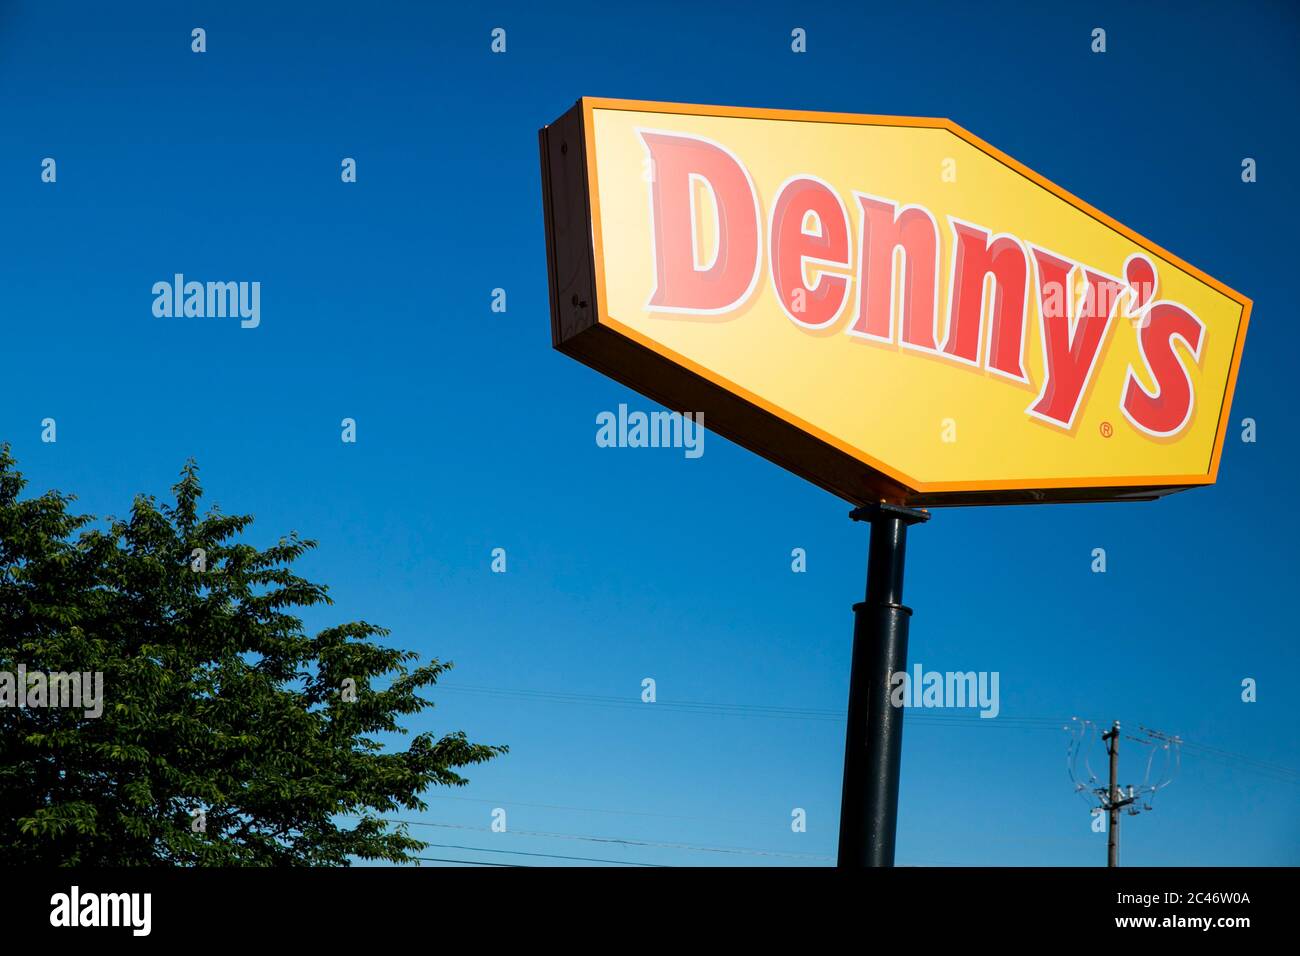 A logo sign outside of a Denny's restaurant location in Hanover, Pennsylvania on June 12, 2020. Stock Photo